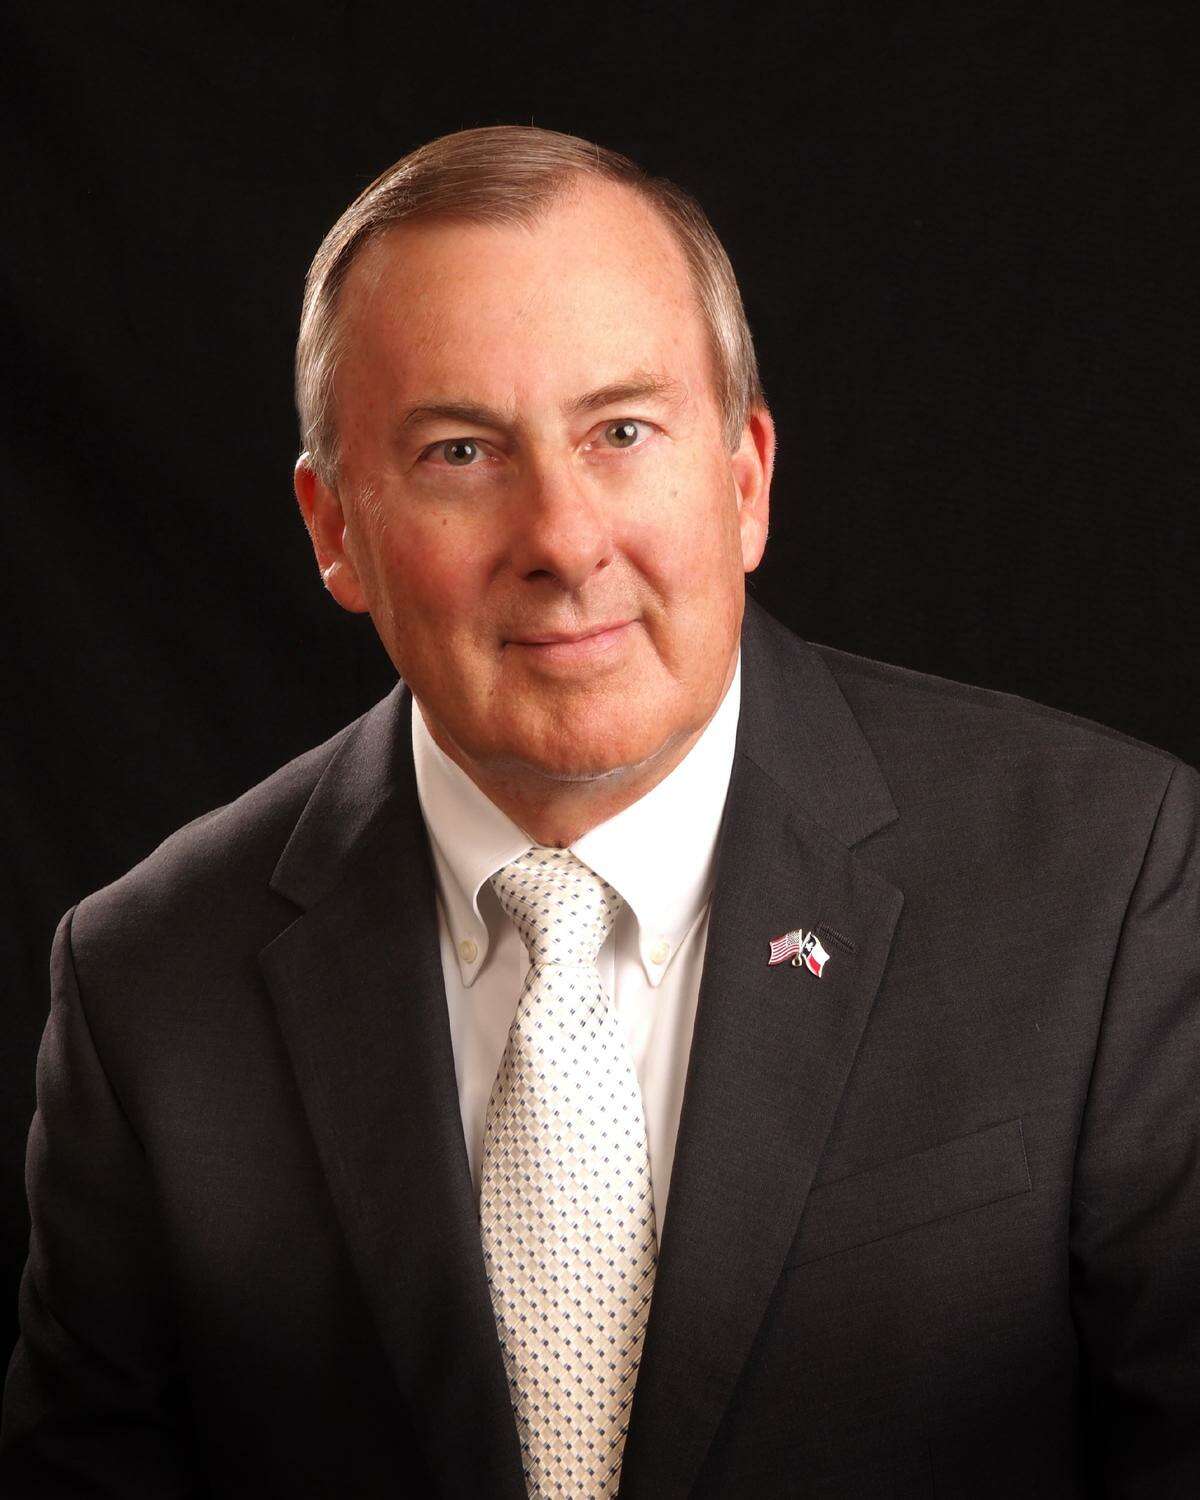 Chuck Brawner is running for re-election for Katy mayor.